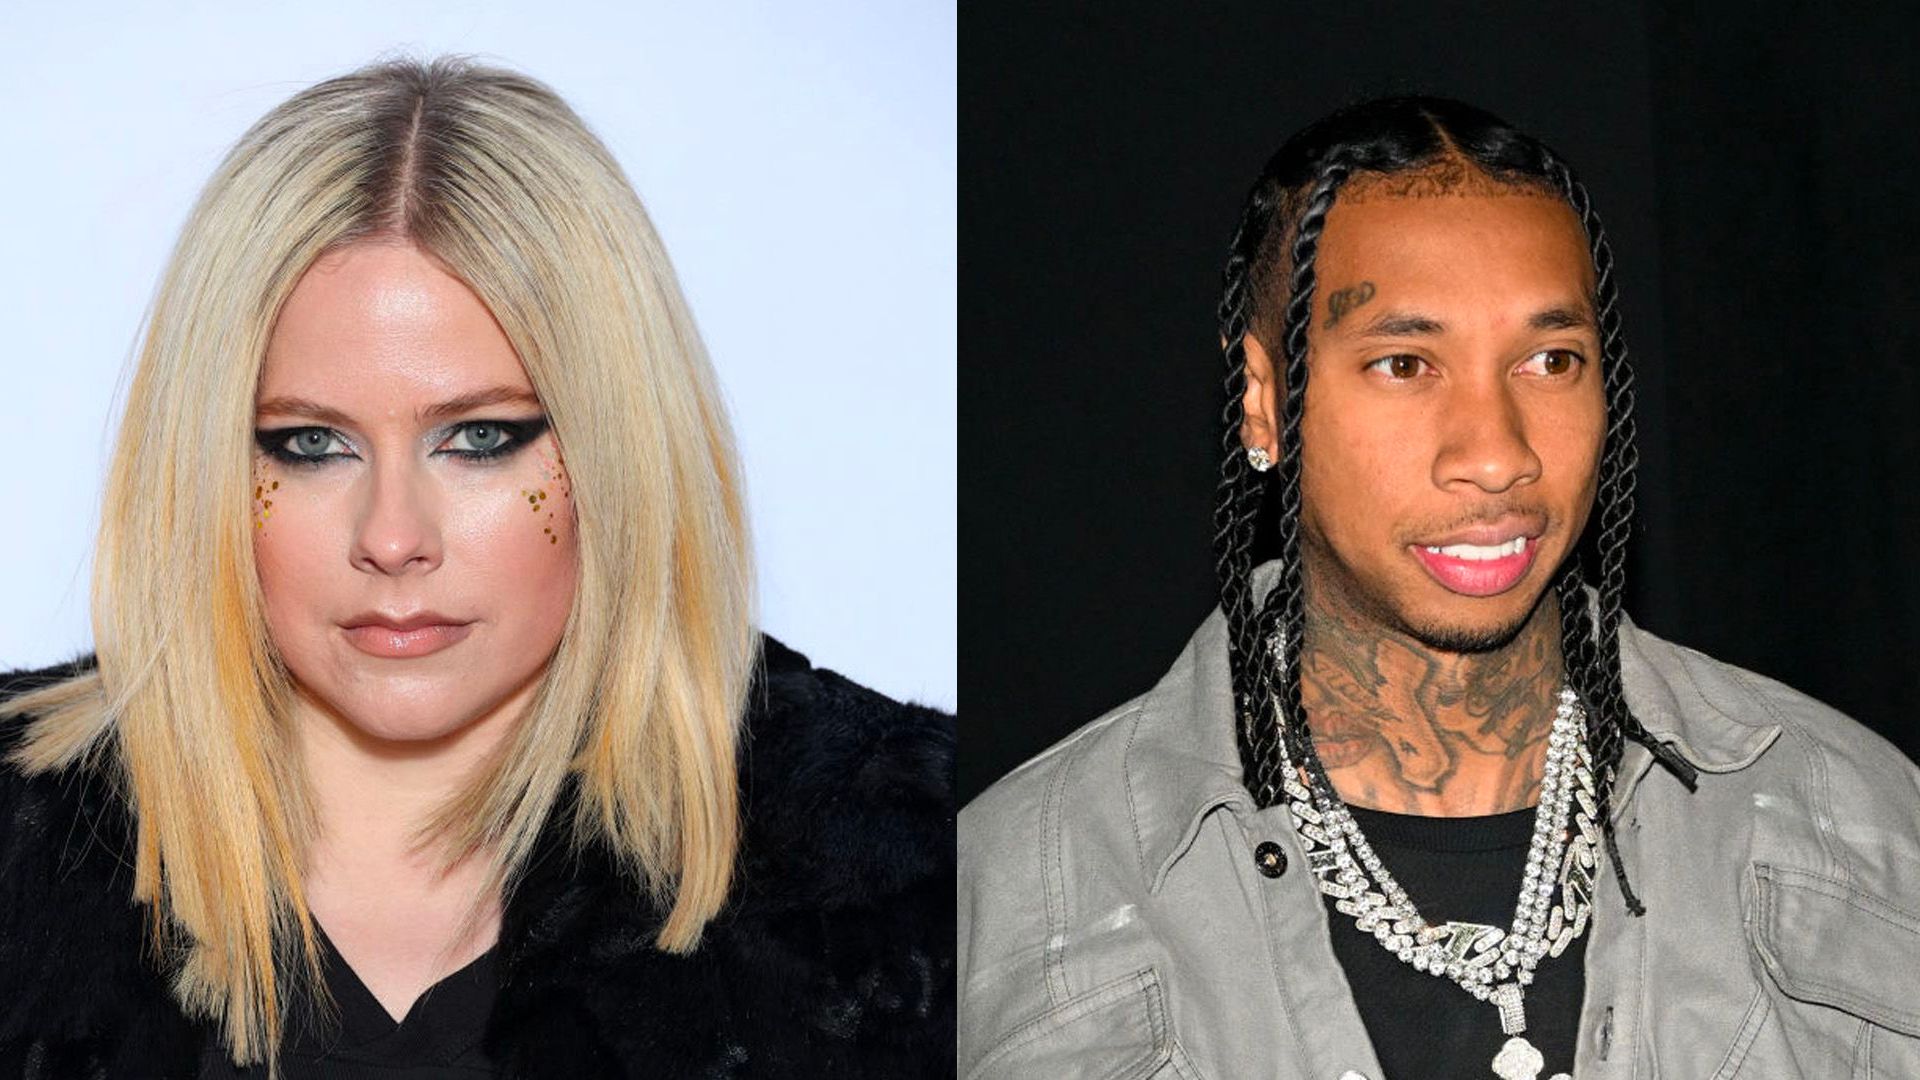 Avril Lavigne and Tyga appear to confirm relationship at PFW